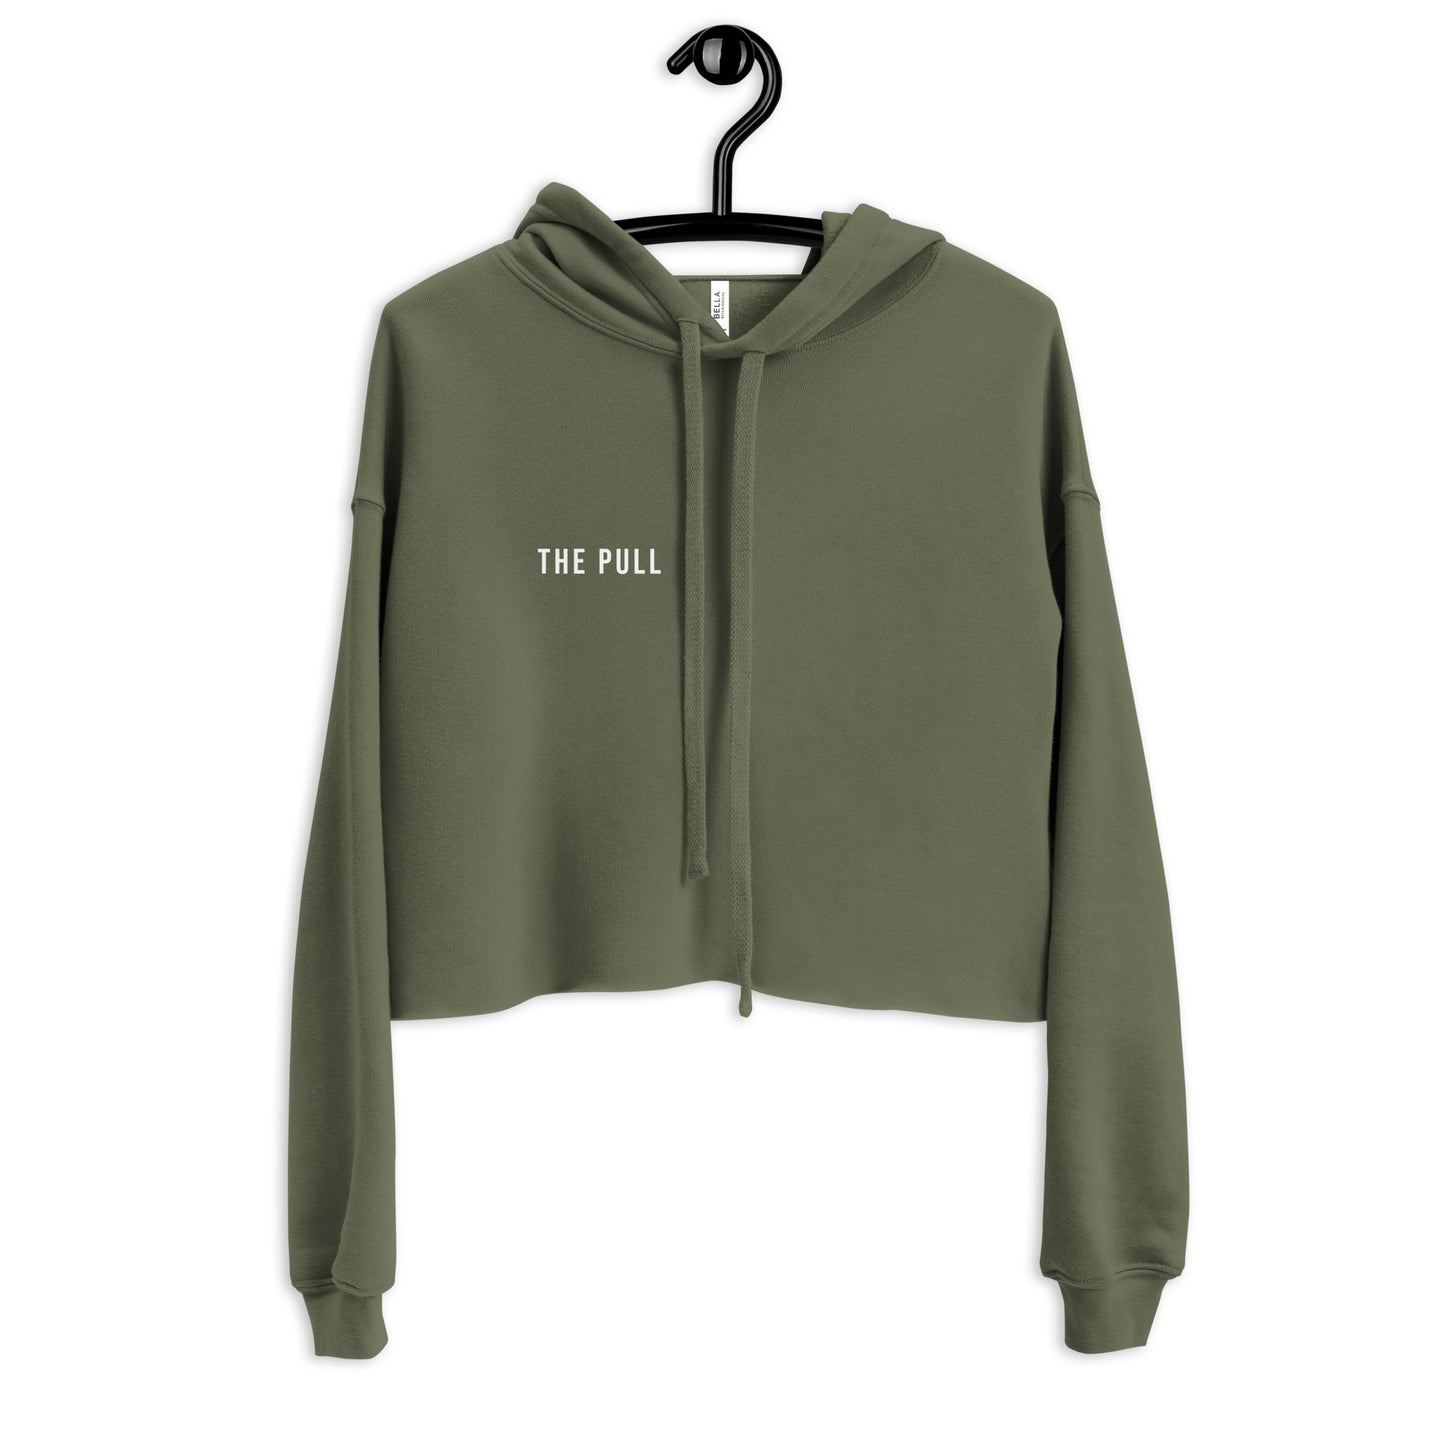 THE PULL Boxy Hoodie